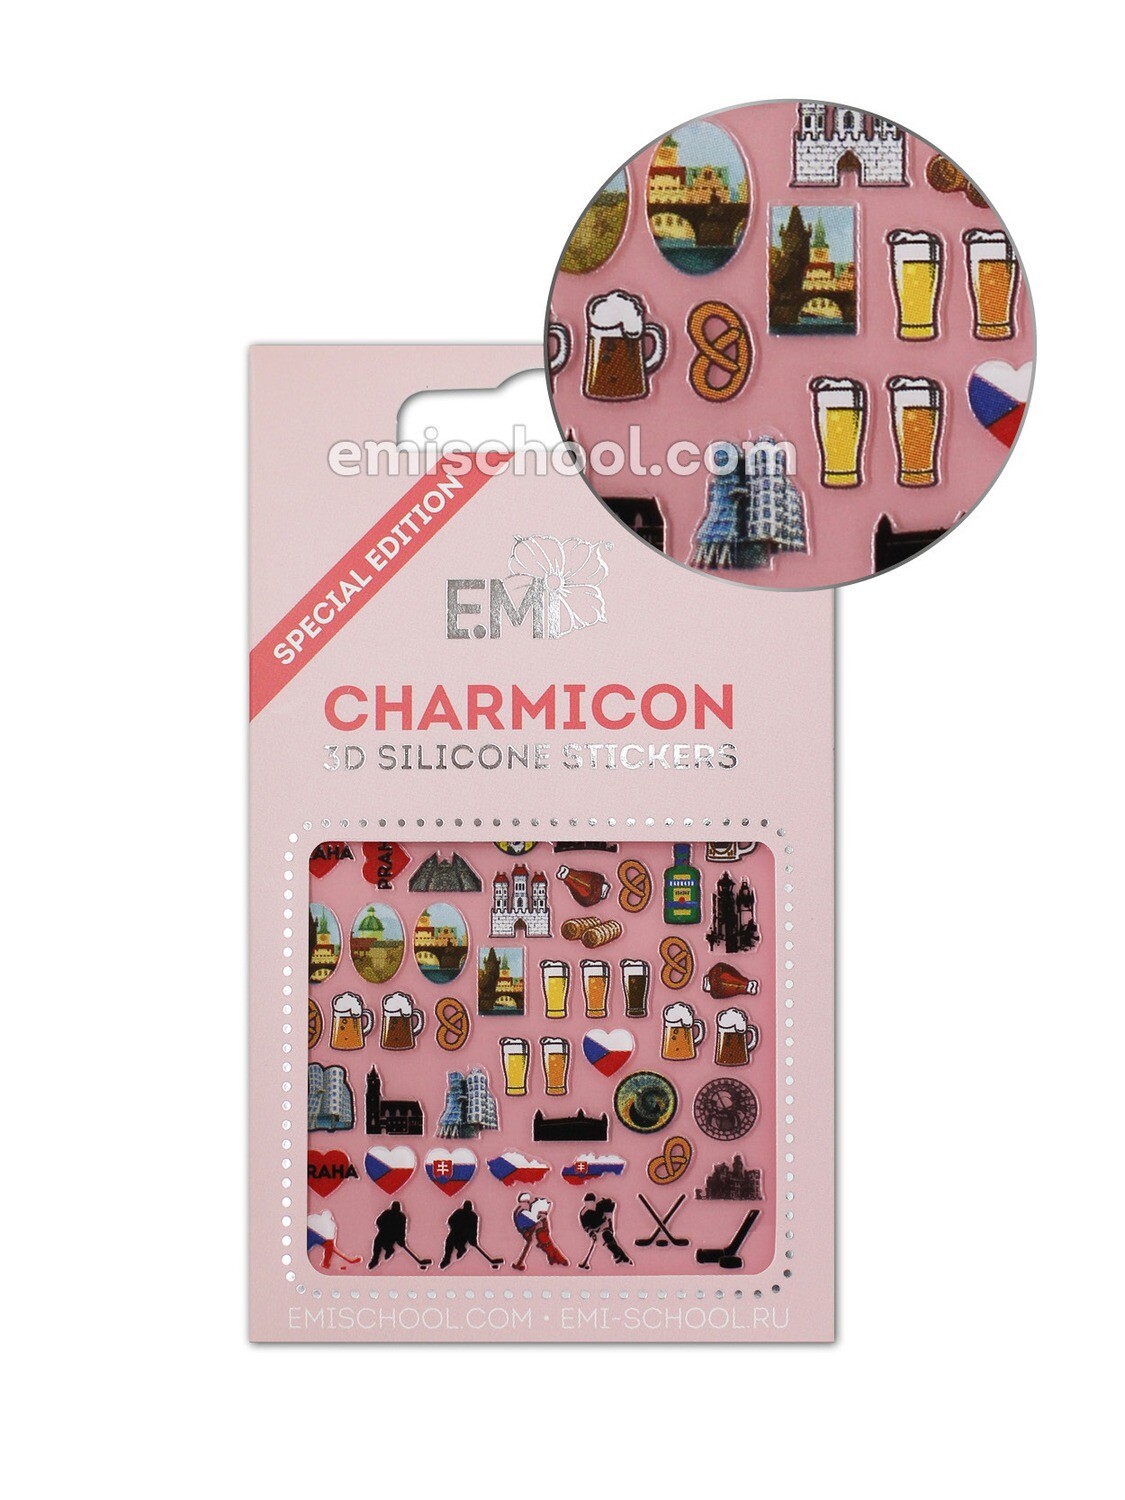 Charmicon 3D Silicone Stickers Czech 2